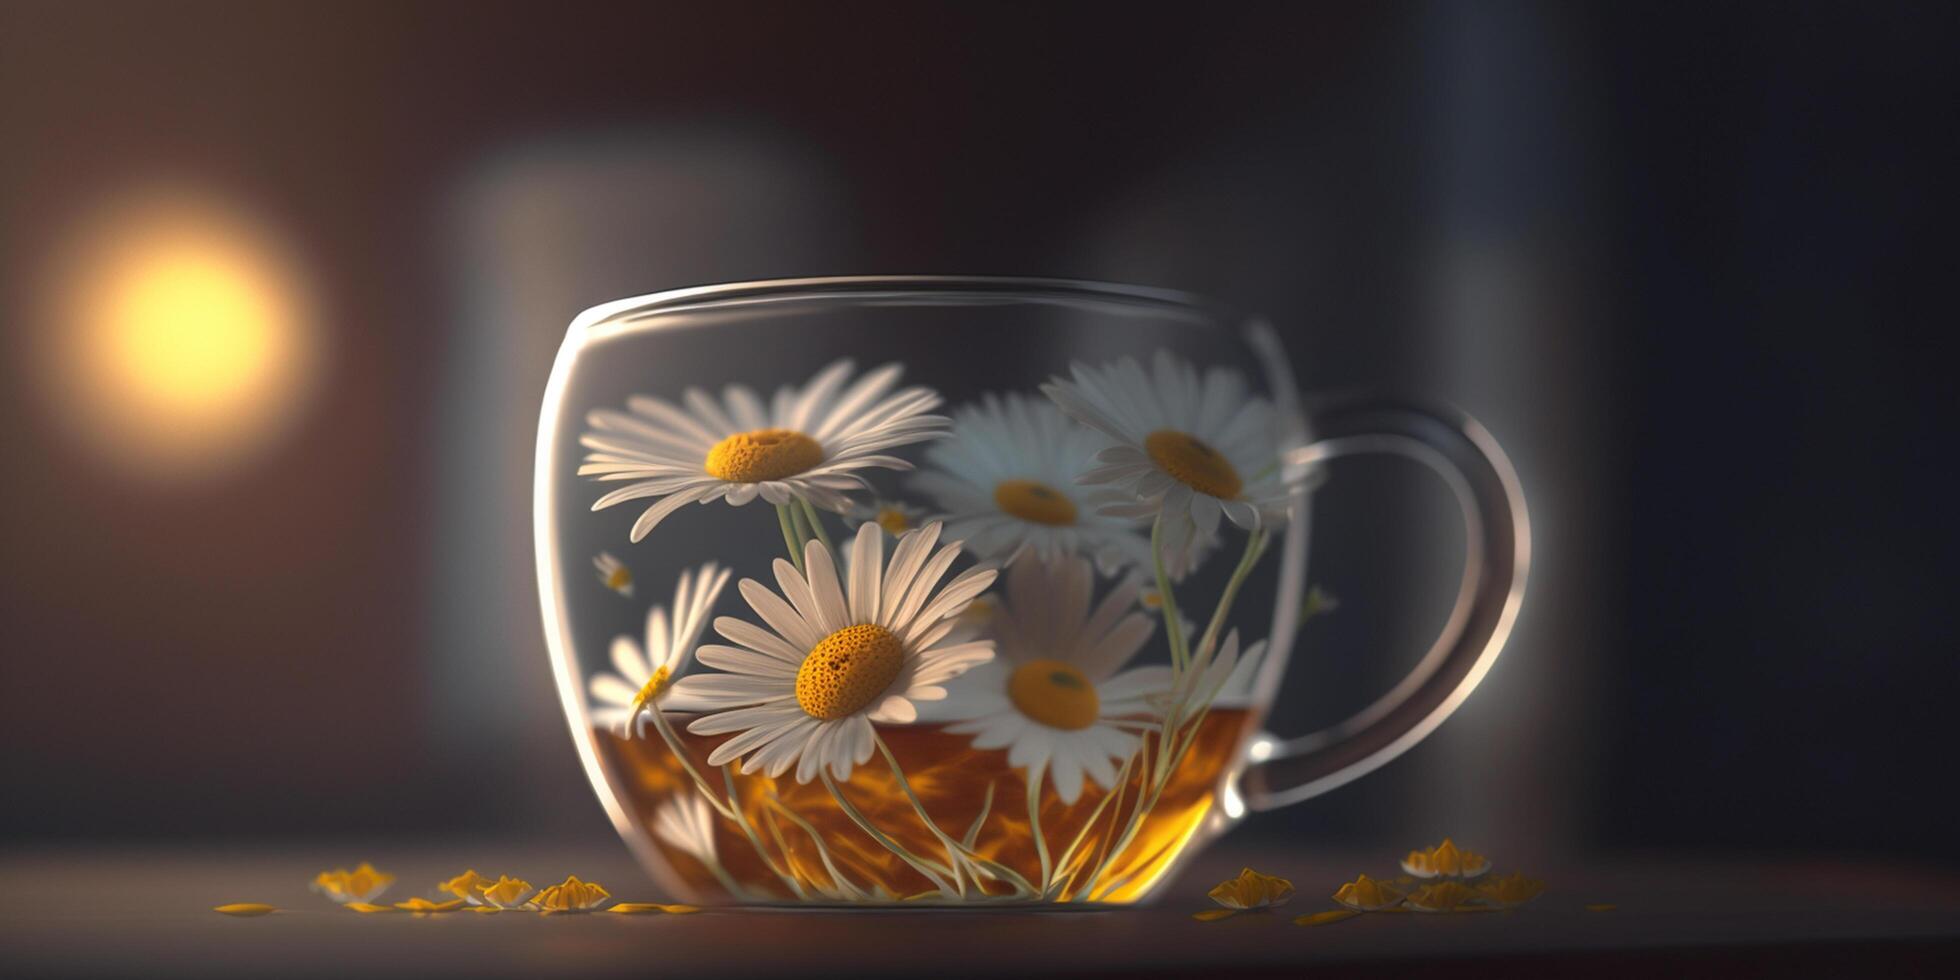 Glass Jar Filled with Chamomile Flowers, Illustrated photo